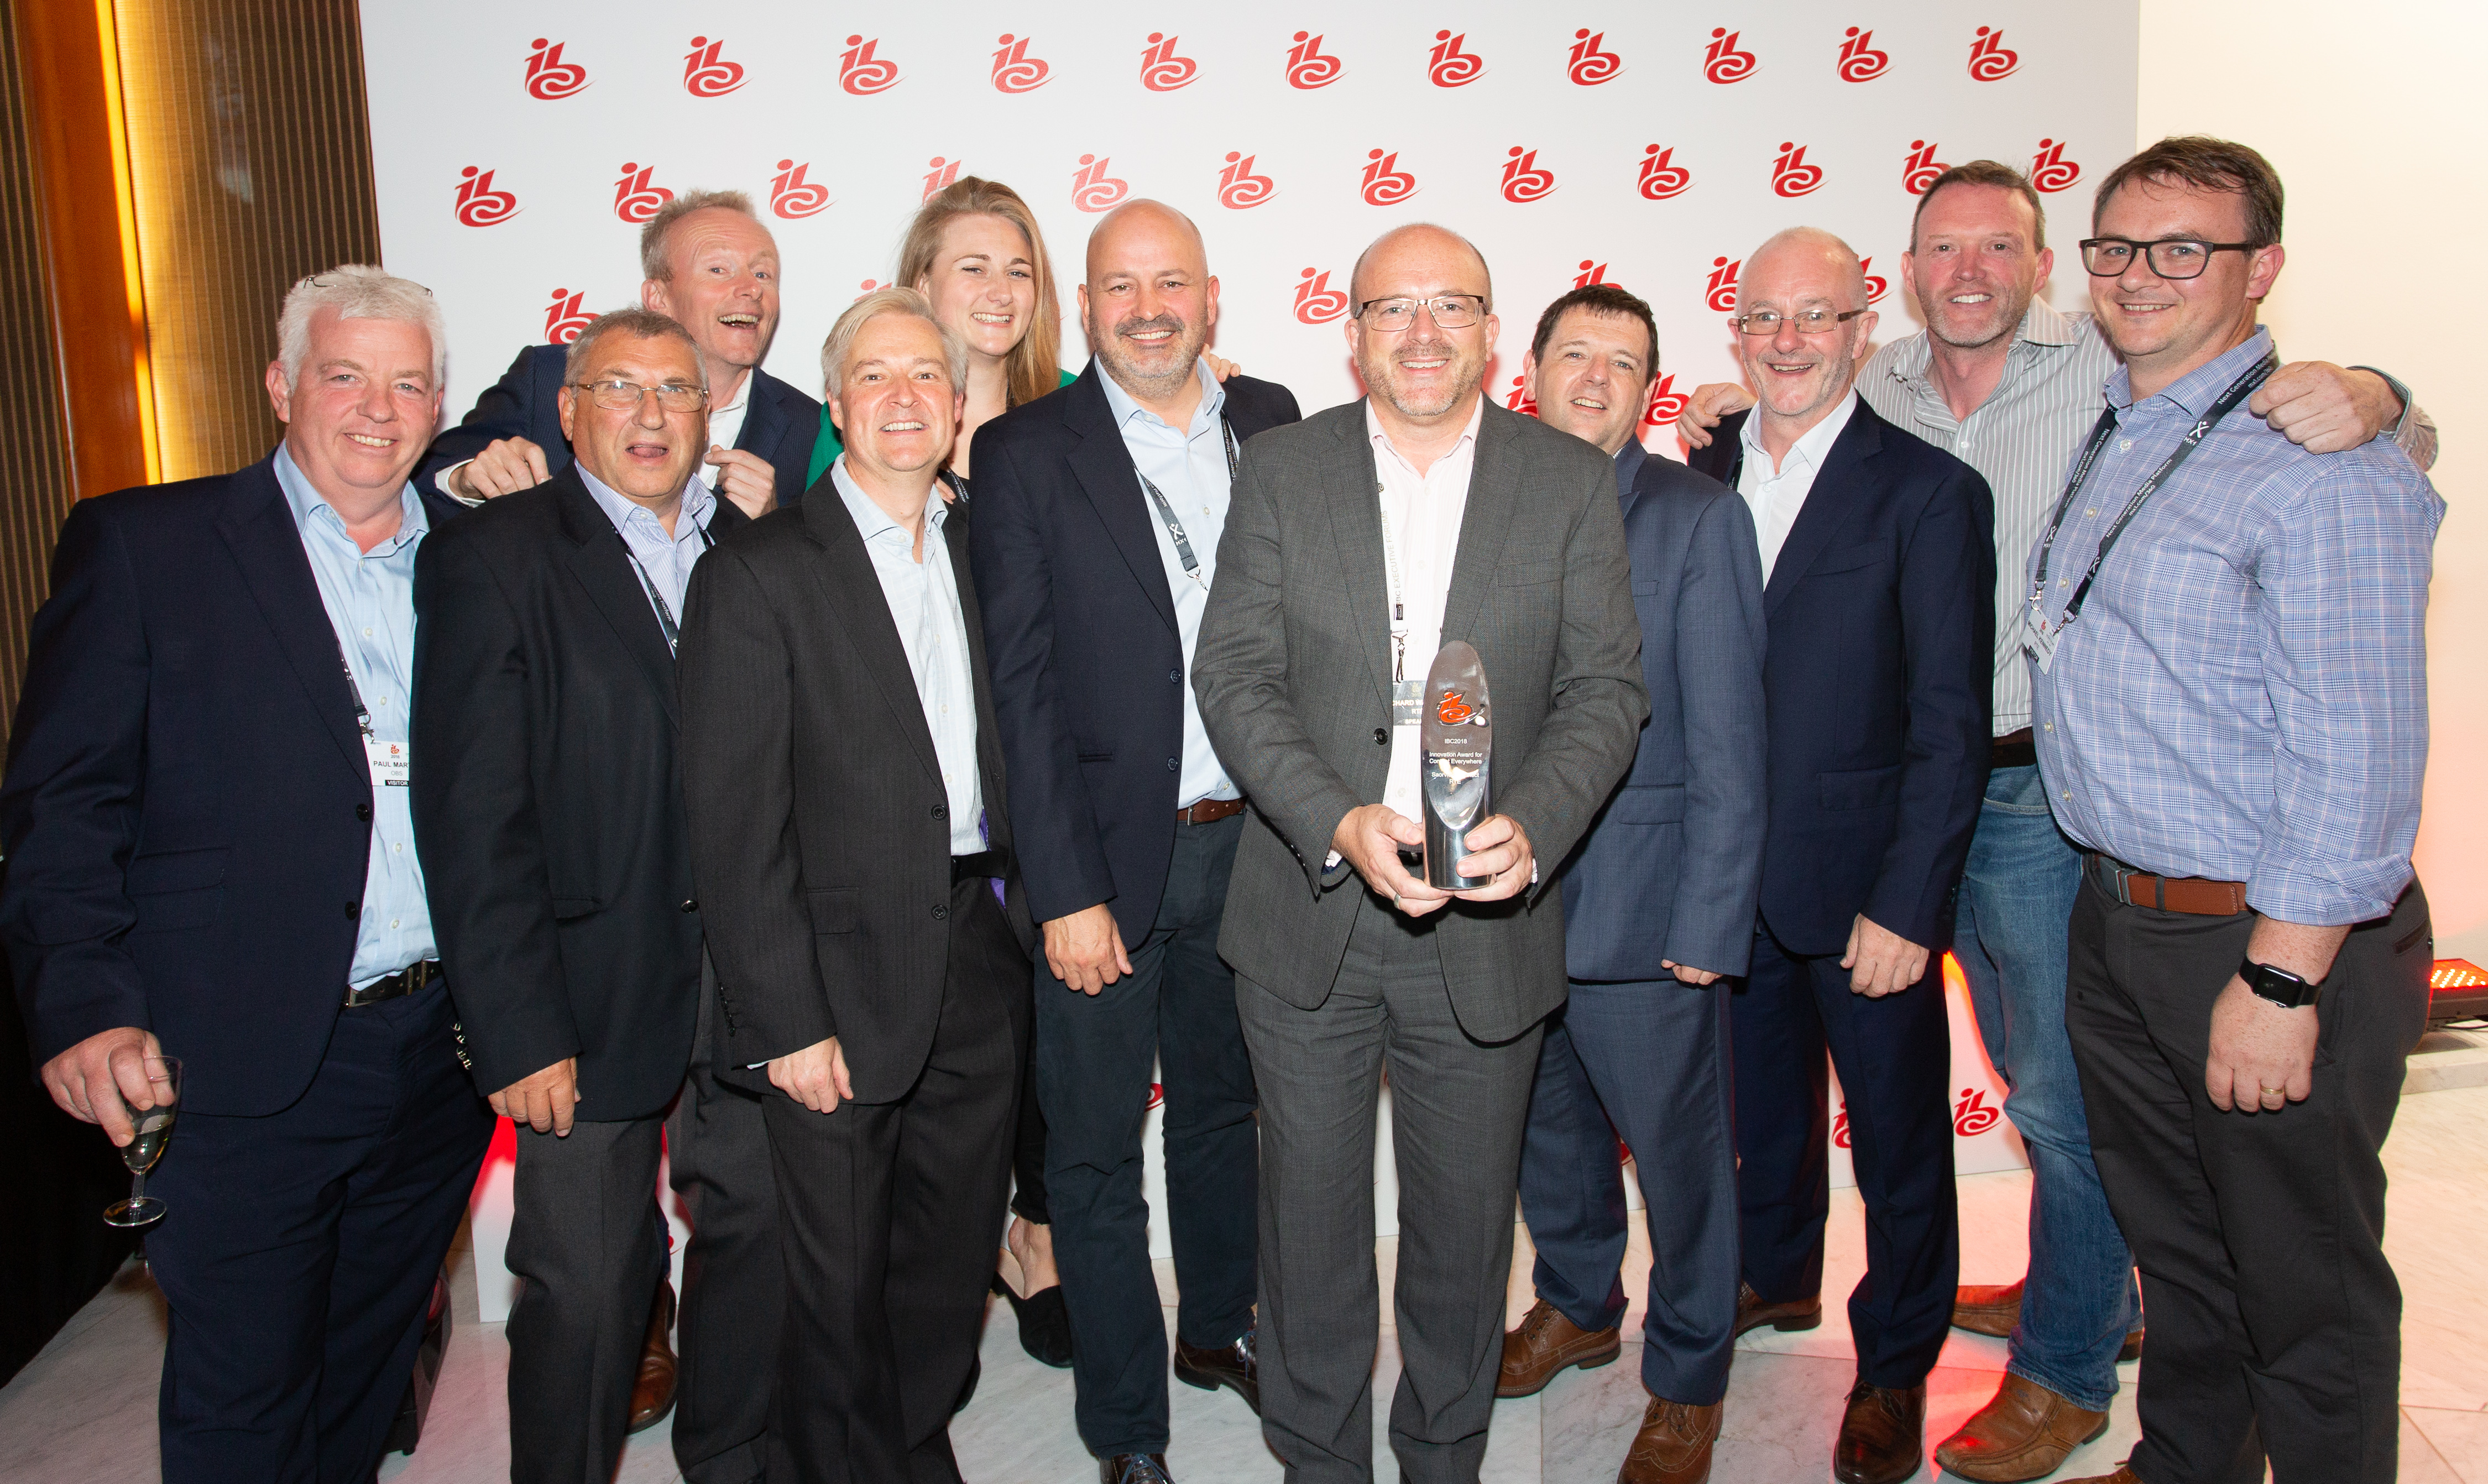 IBC Innovation Award for Content Everywhere.